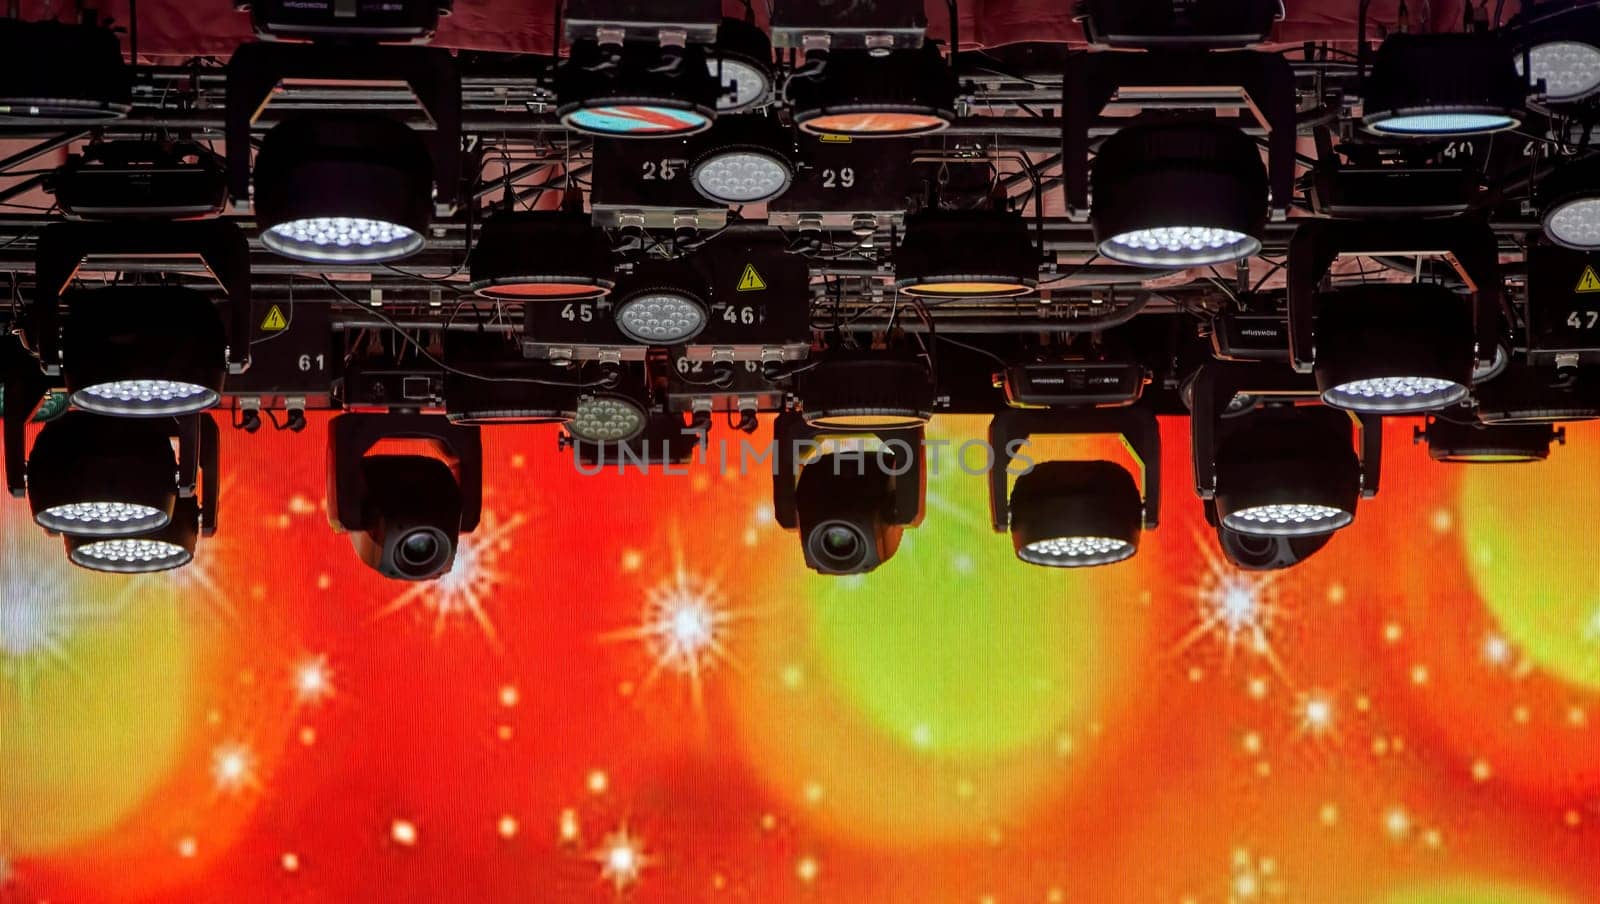 A lot of spotlights on the ceiling of the concert hall. Bright stage lights are on. The spotlights are arranged in a grid pattern. The stage is dark. The spotlights are creating a dramatic effect.